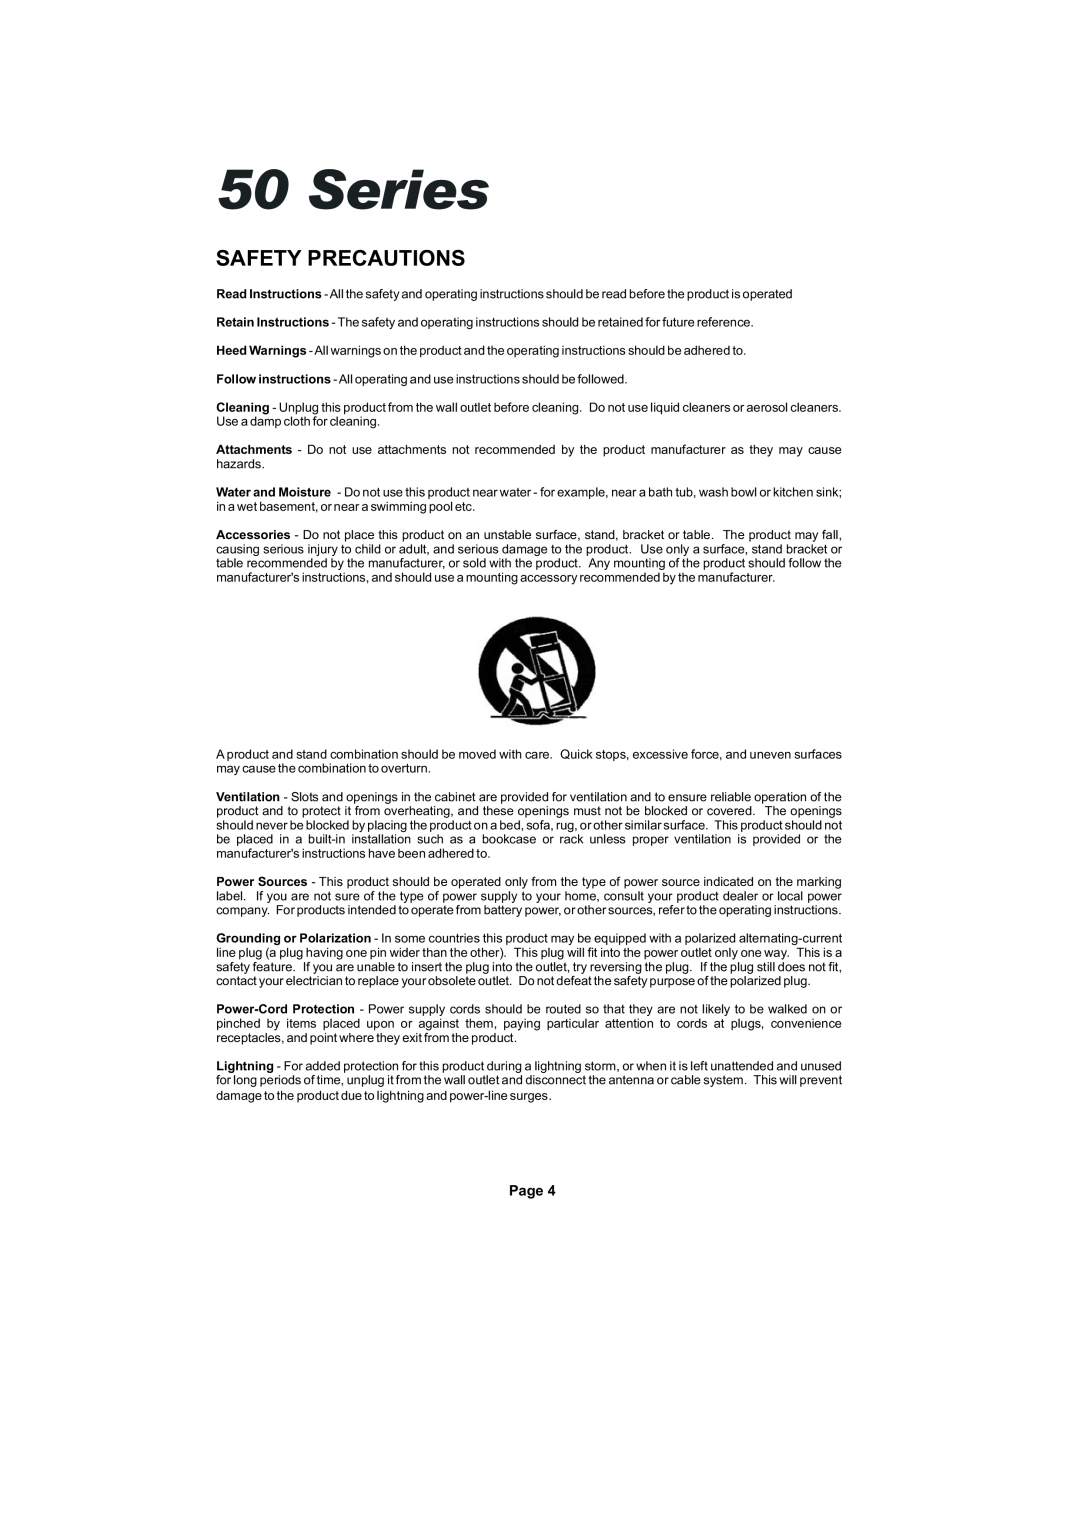 Cambridge Audio SERIES50 owner manual Series, Safety Precautions, Page 